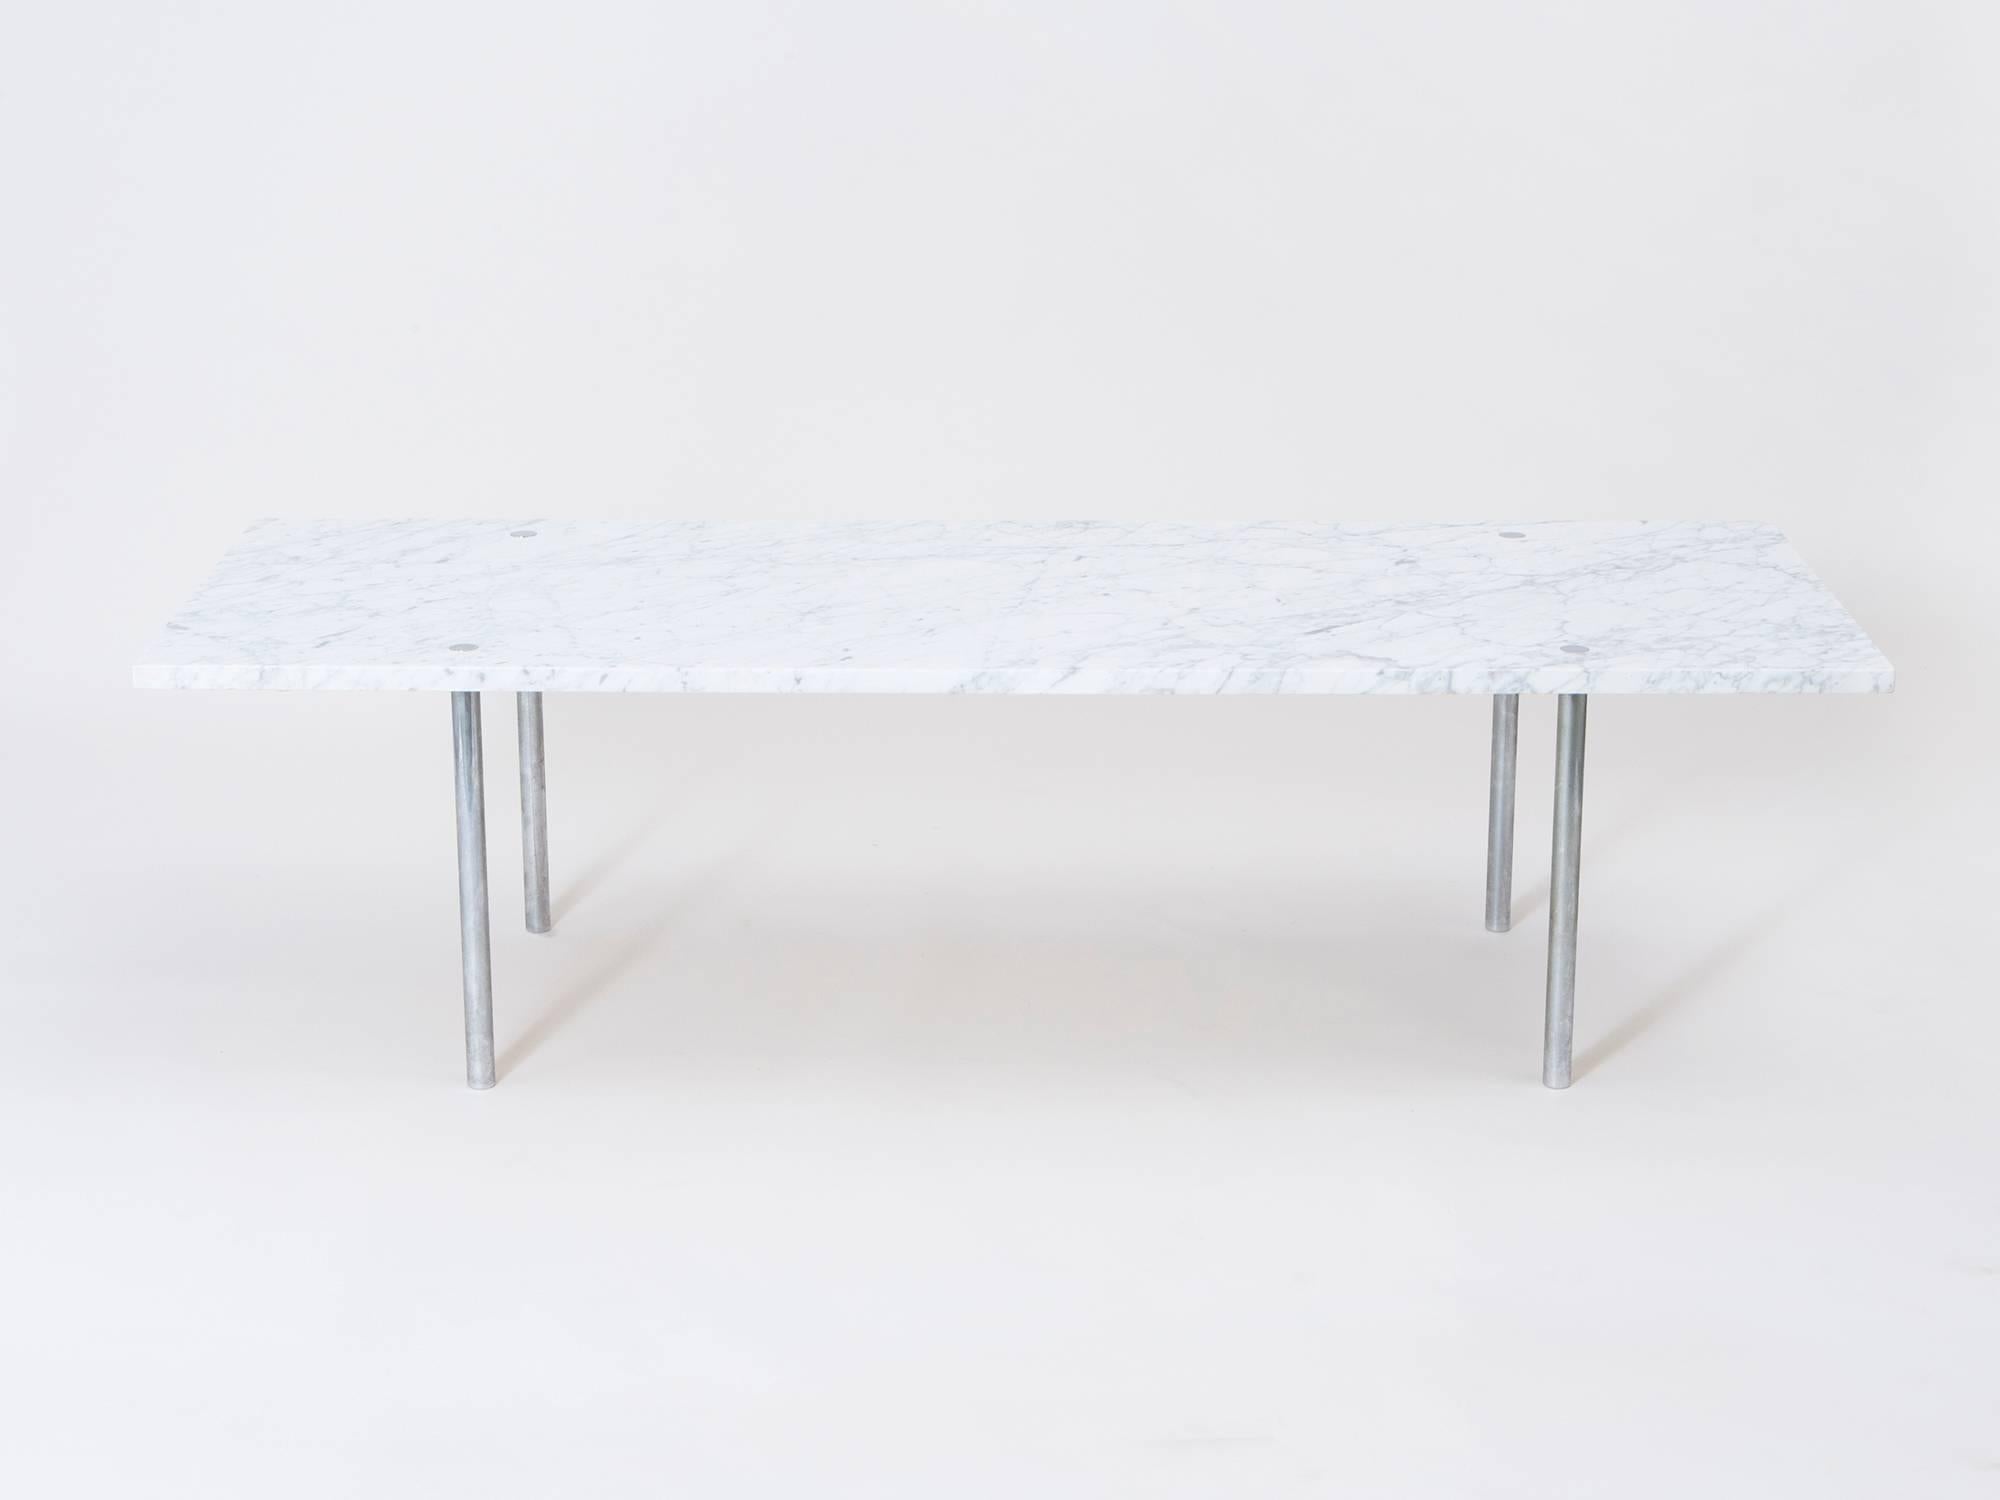 Strikingly simple and elegant Carrara marble and chrome-plated steel modernist coffee table by architectural design team William Katavolos, Doug Kelley & Ross Littell for Laverne.